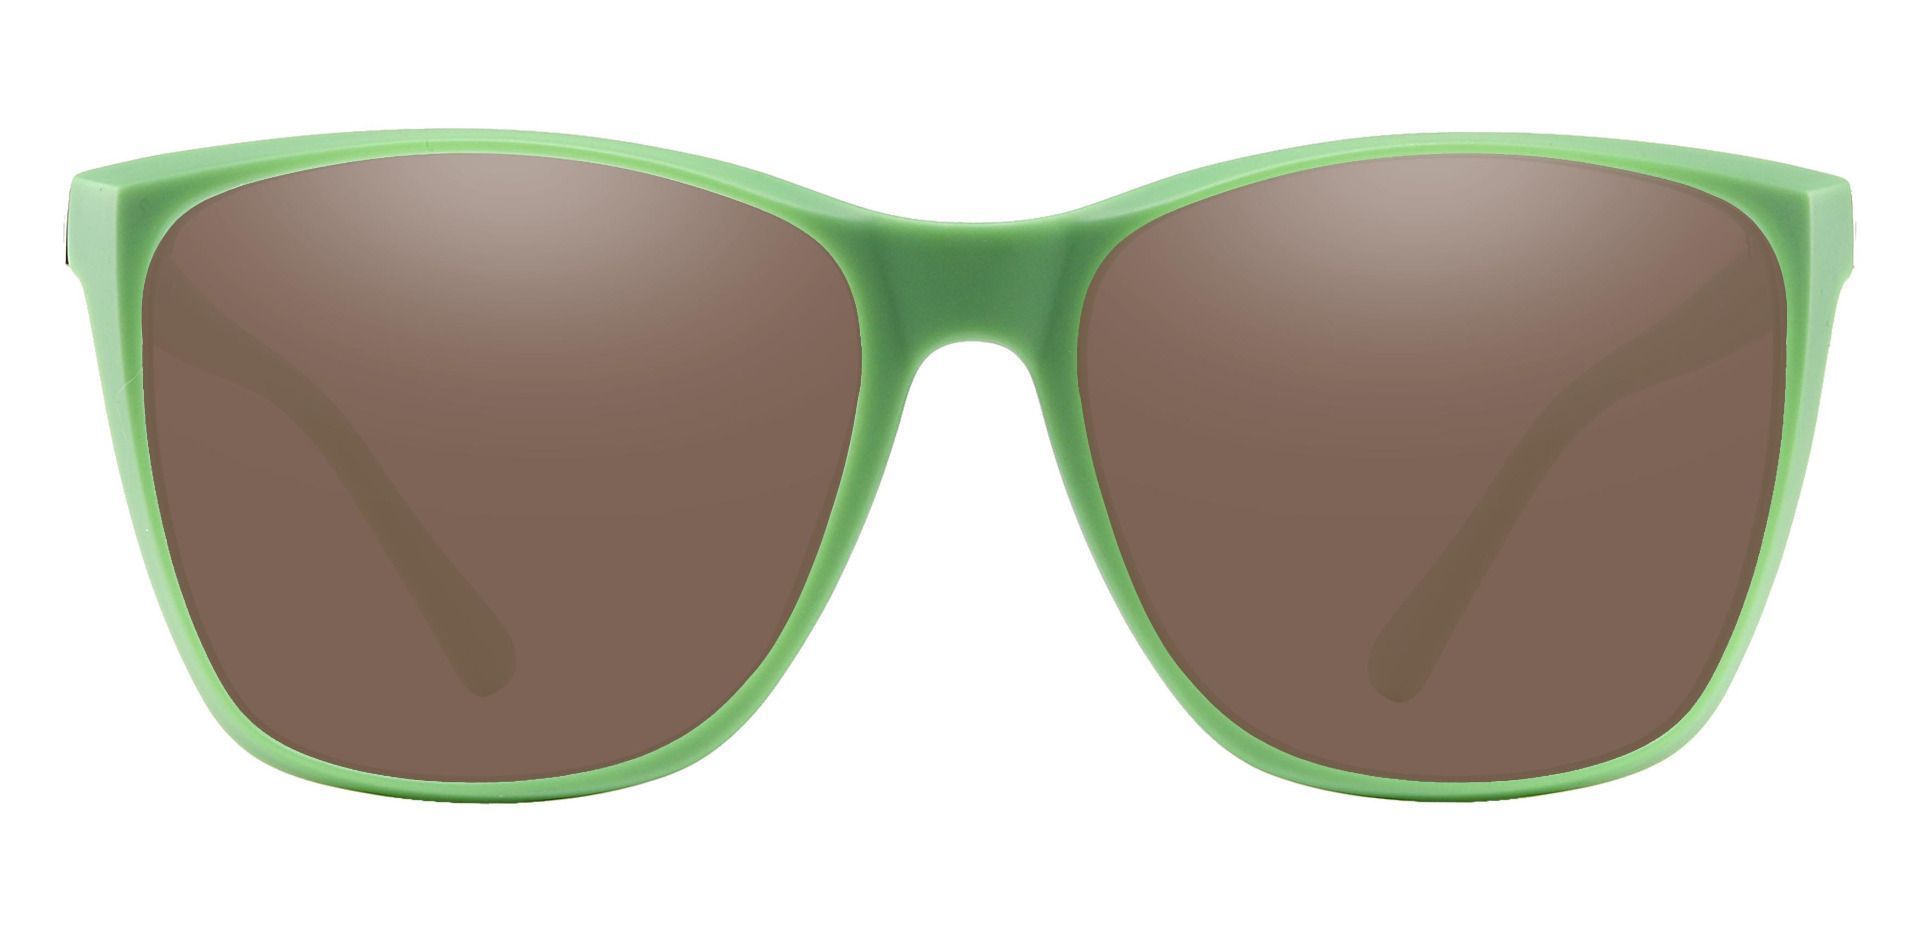 Hickory Square Non-Rx Sunglasses - Green Frame With Brown Lenses